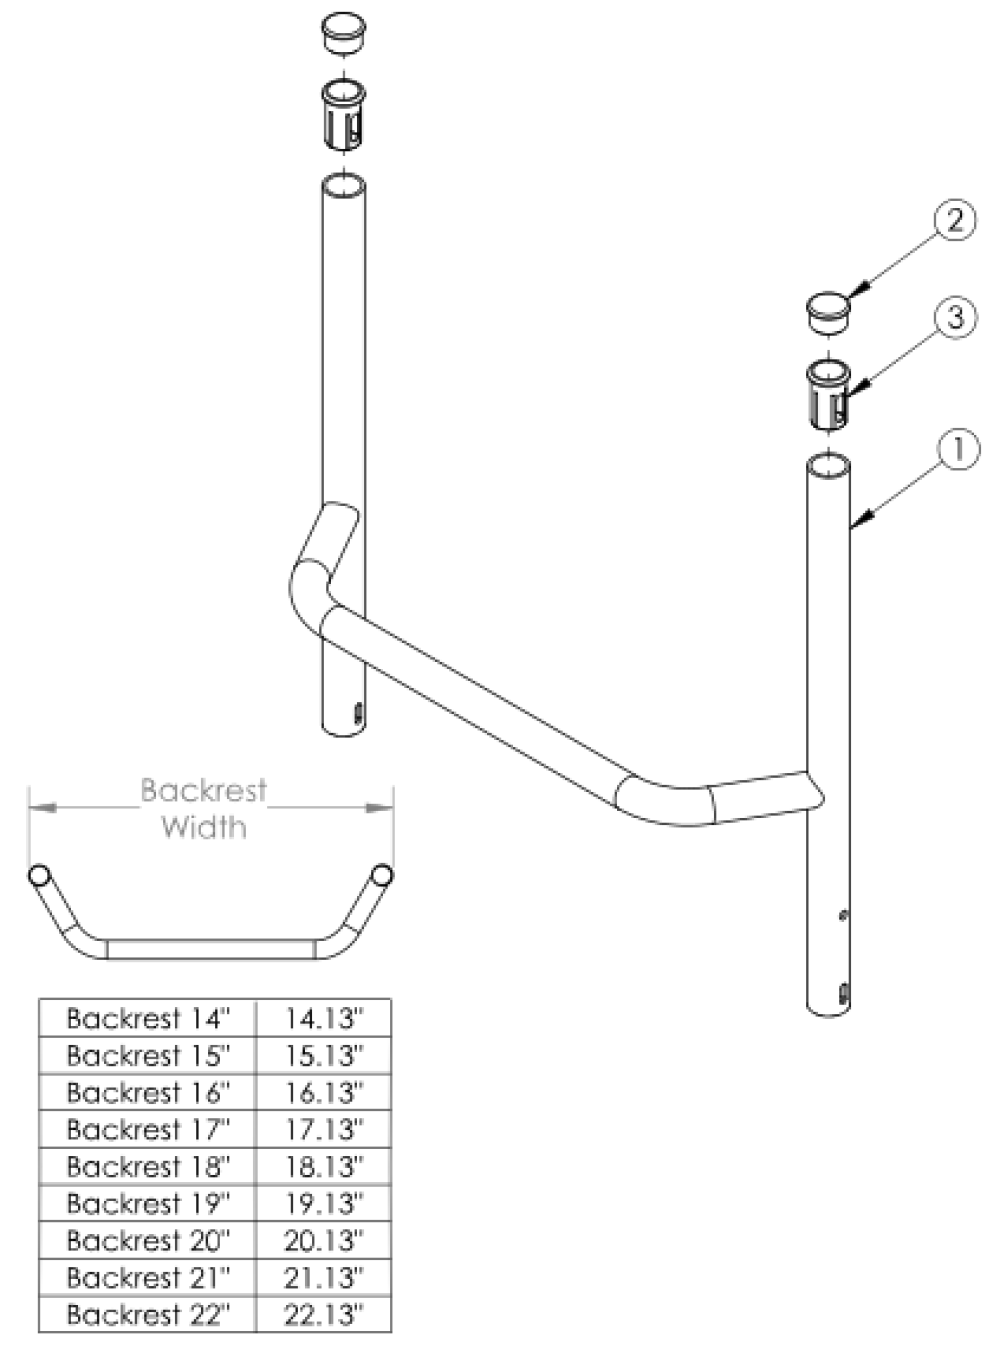 Rogue Alx Fixed Height Backrest With Non-adjustable Rigidizer Bar - Growth (formerly Tsunami) parts diagram